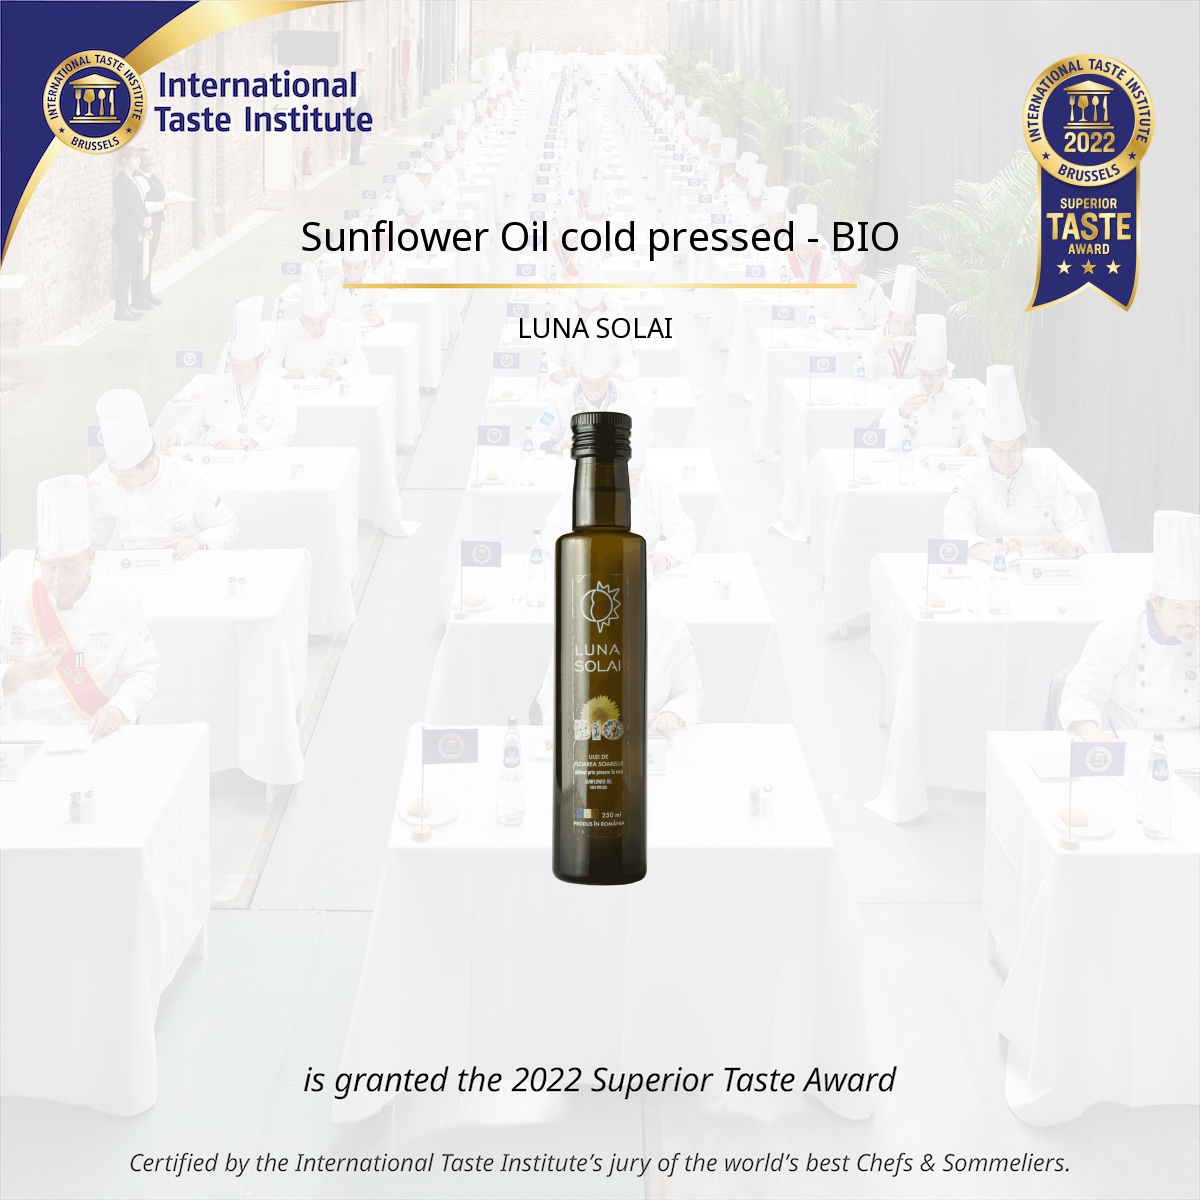 Our organic sunflower seeds oil has been awarded with a Superior Taste Award